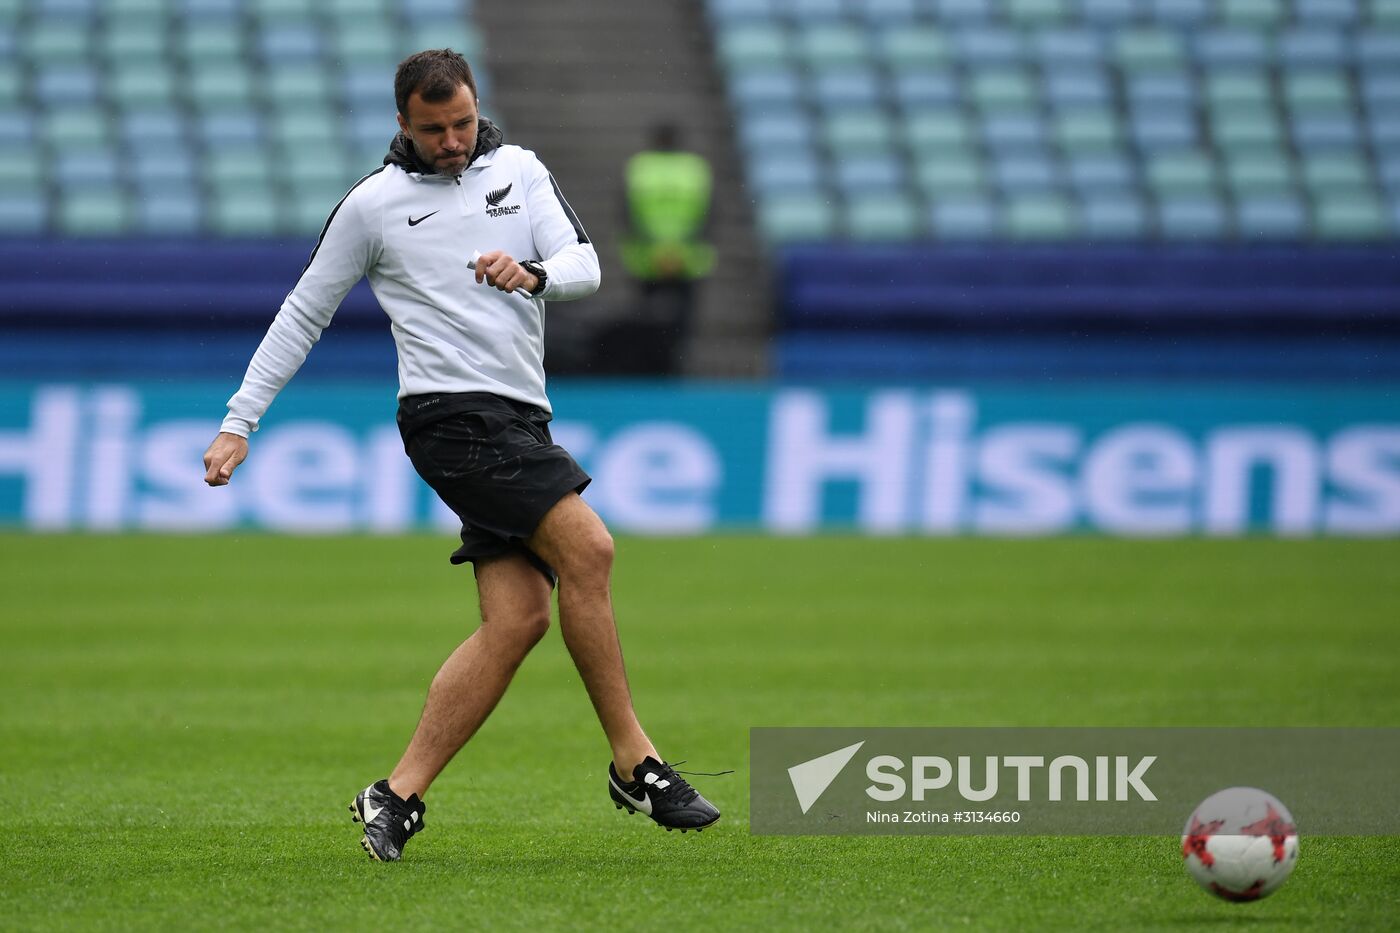 Football. 2017 FIFA Confederations Cup. Training session of New Zealand’s national team